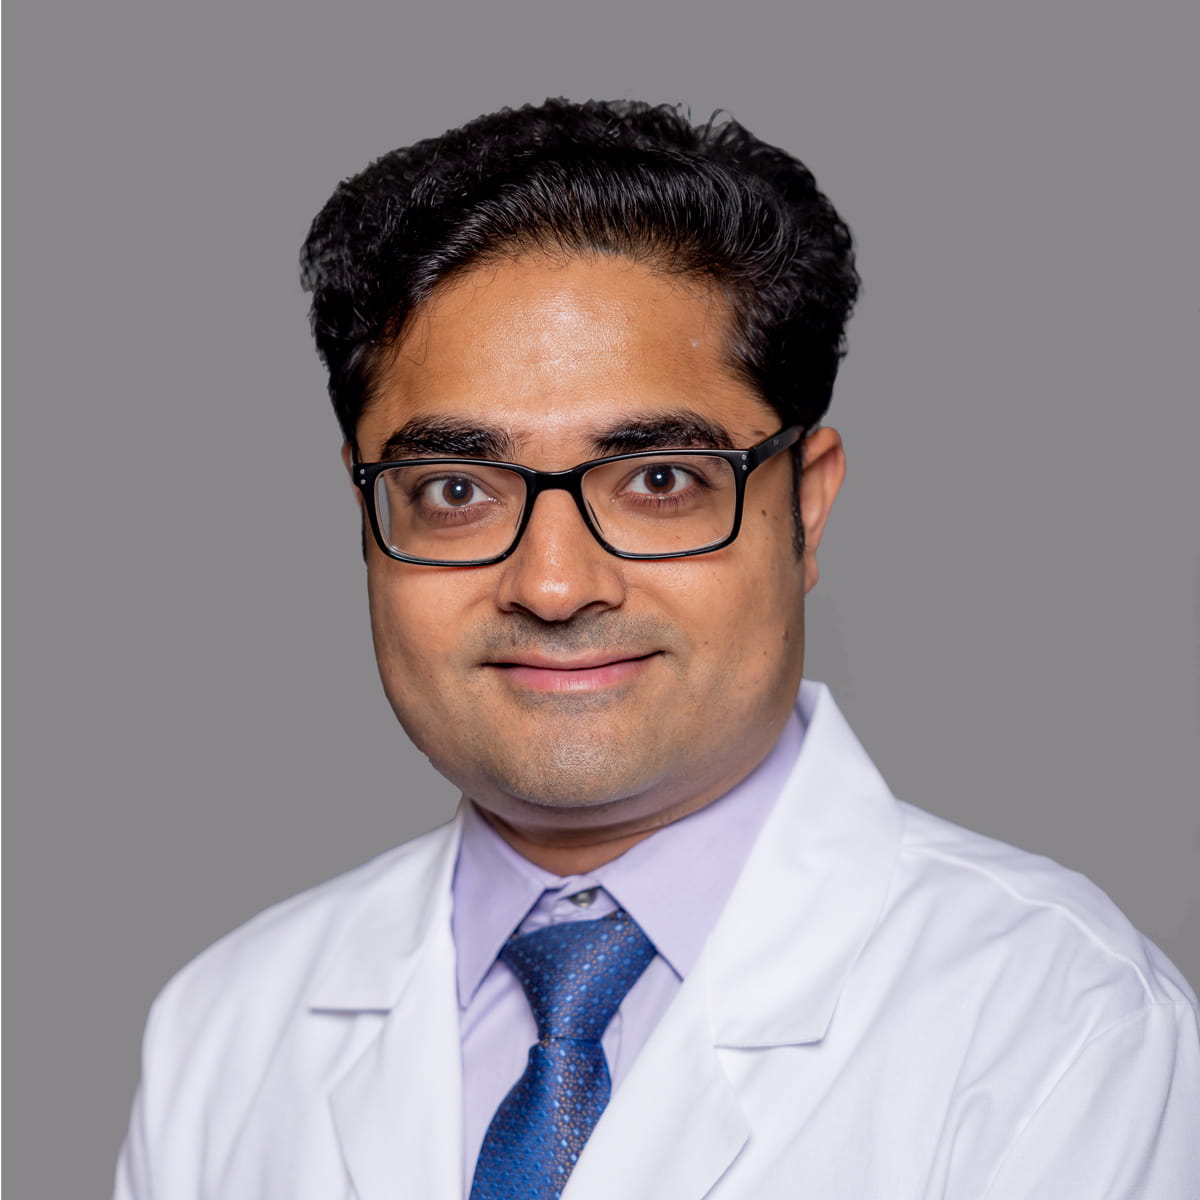 A friendly image of Sameer Arora MD